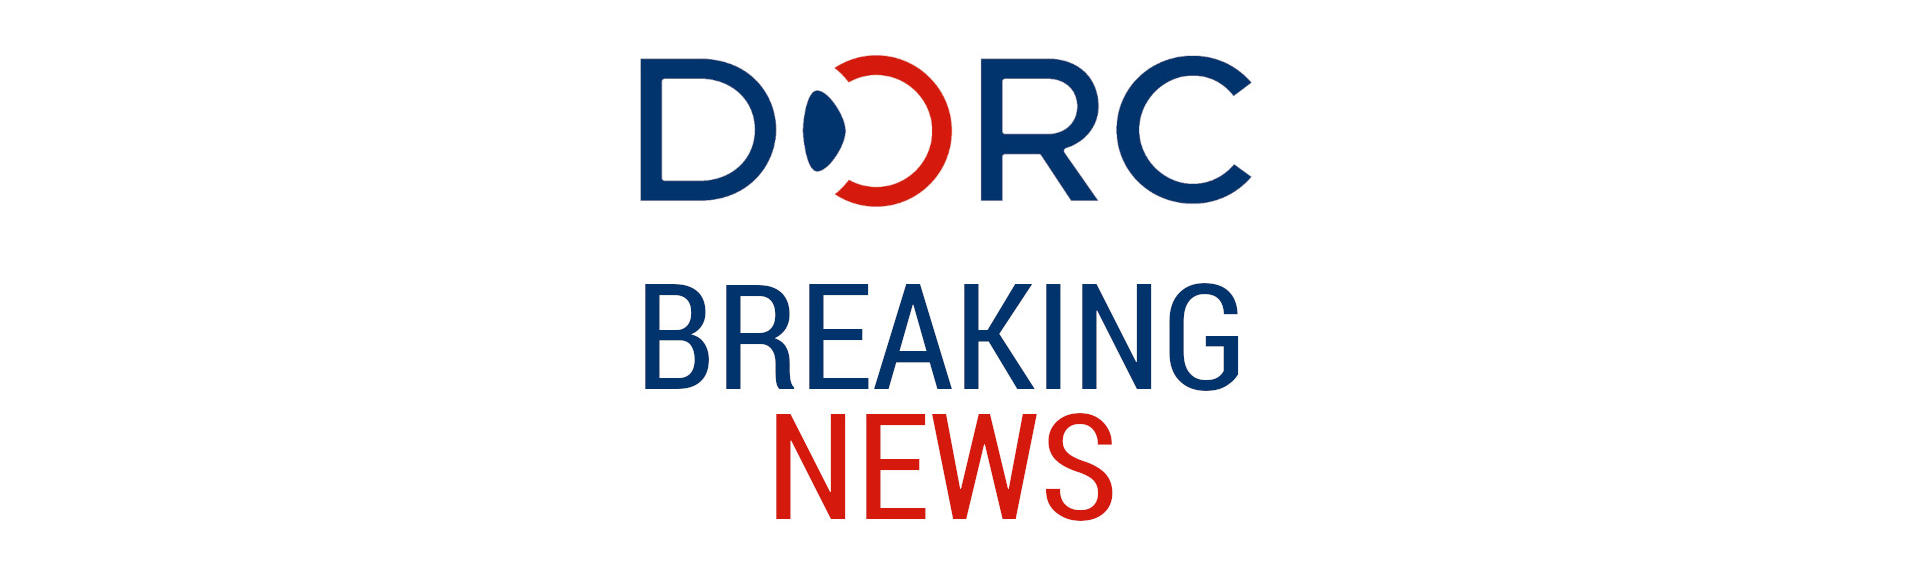 Carl Zeiss Meditec AG announces agreement to acquire D.O.R.C.